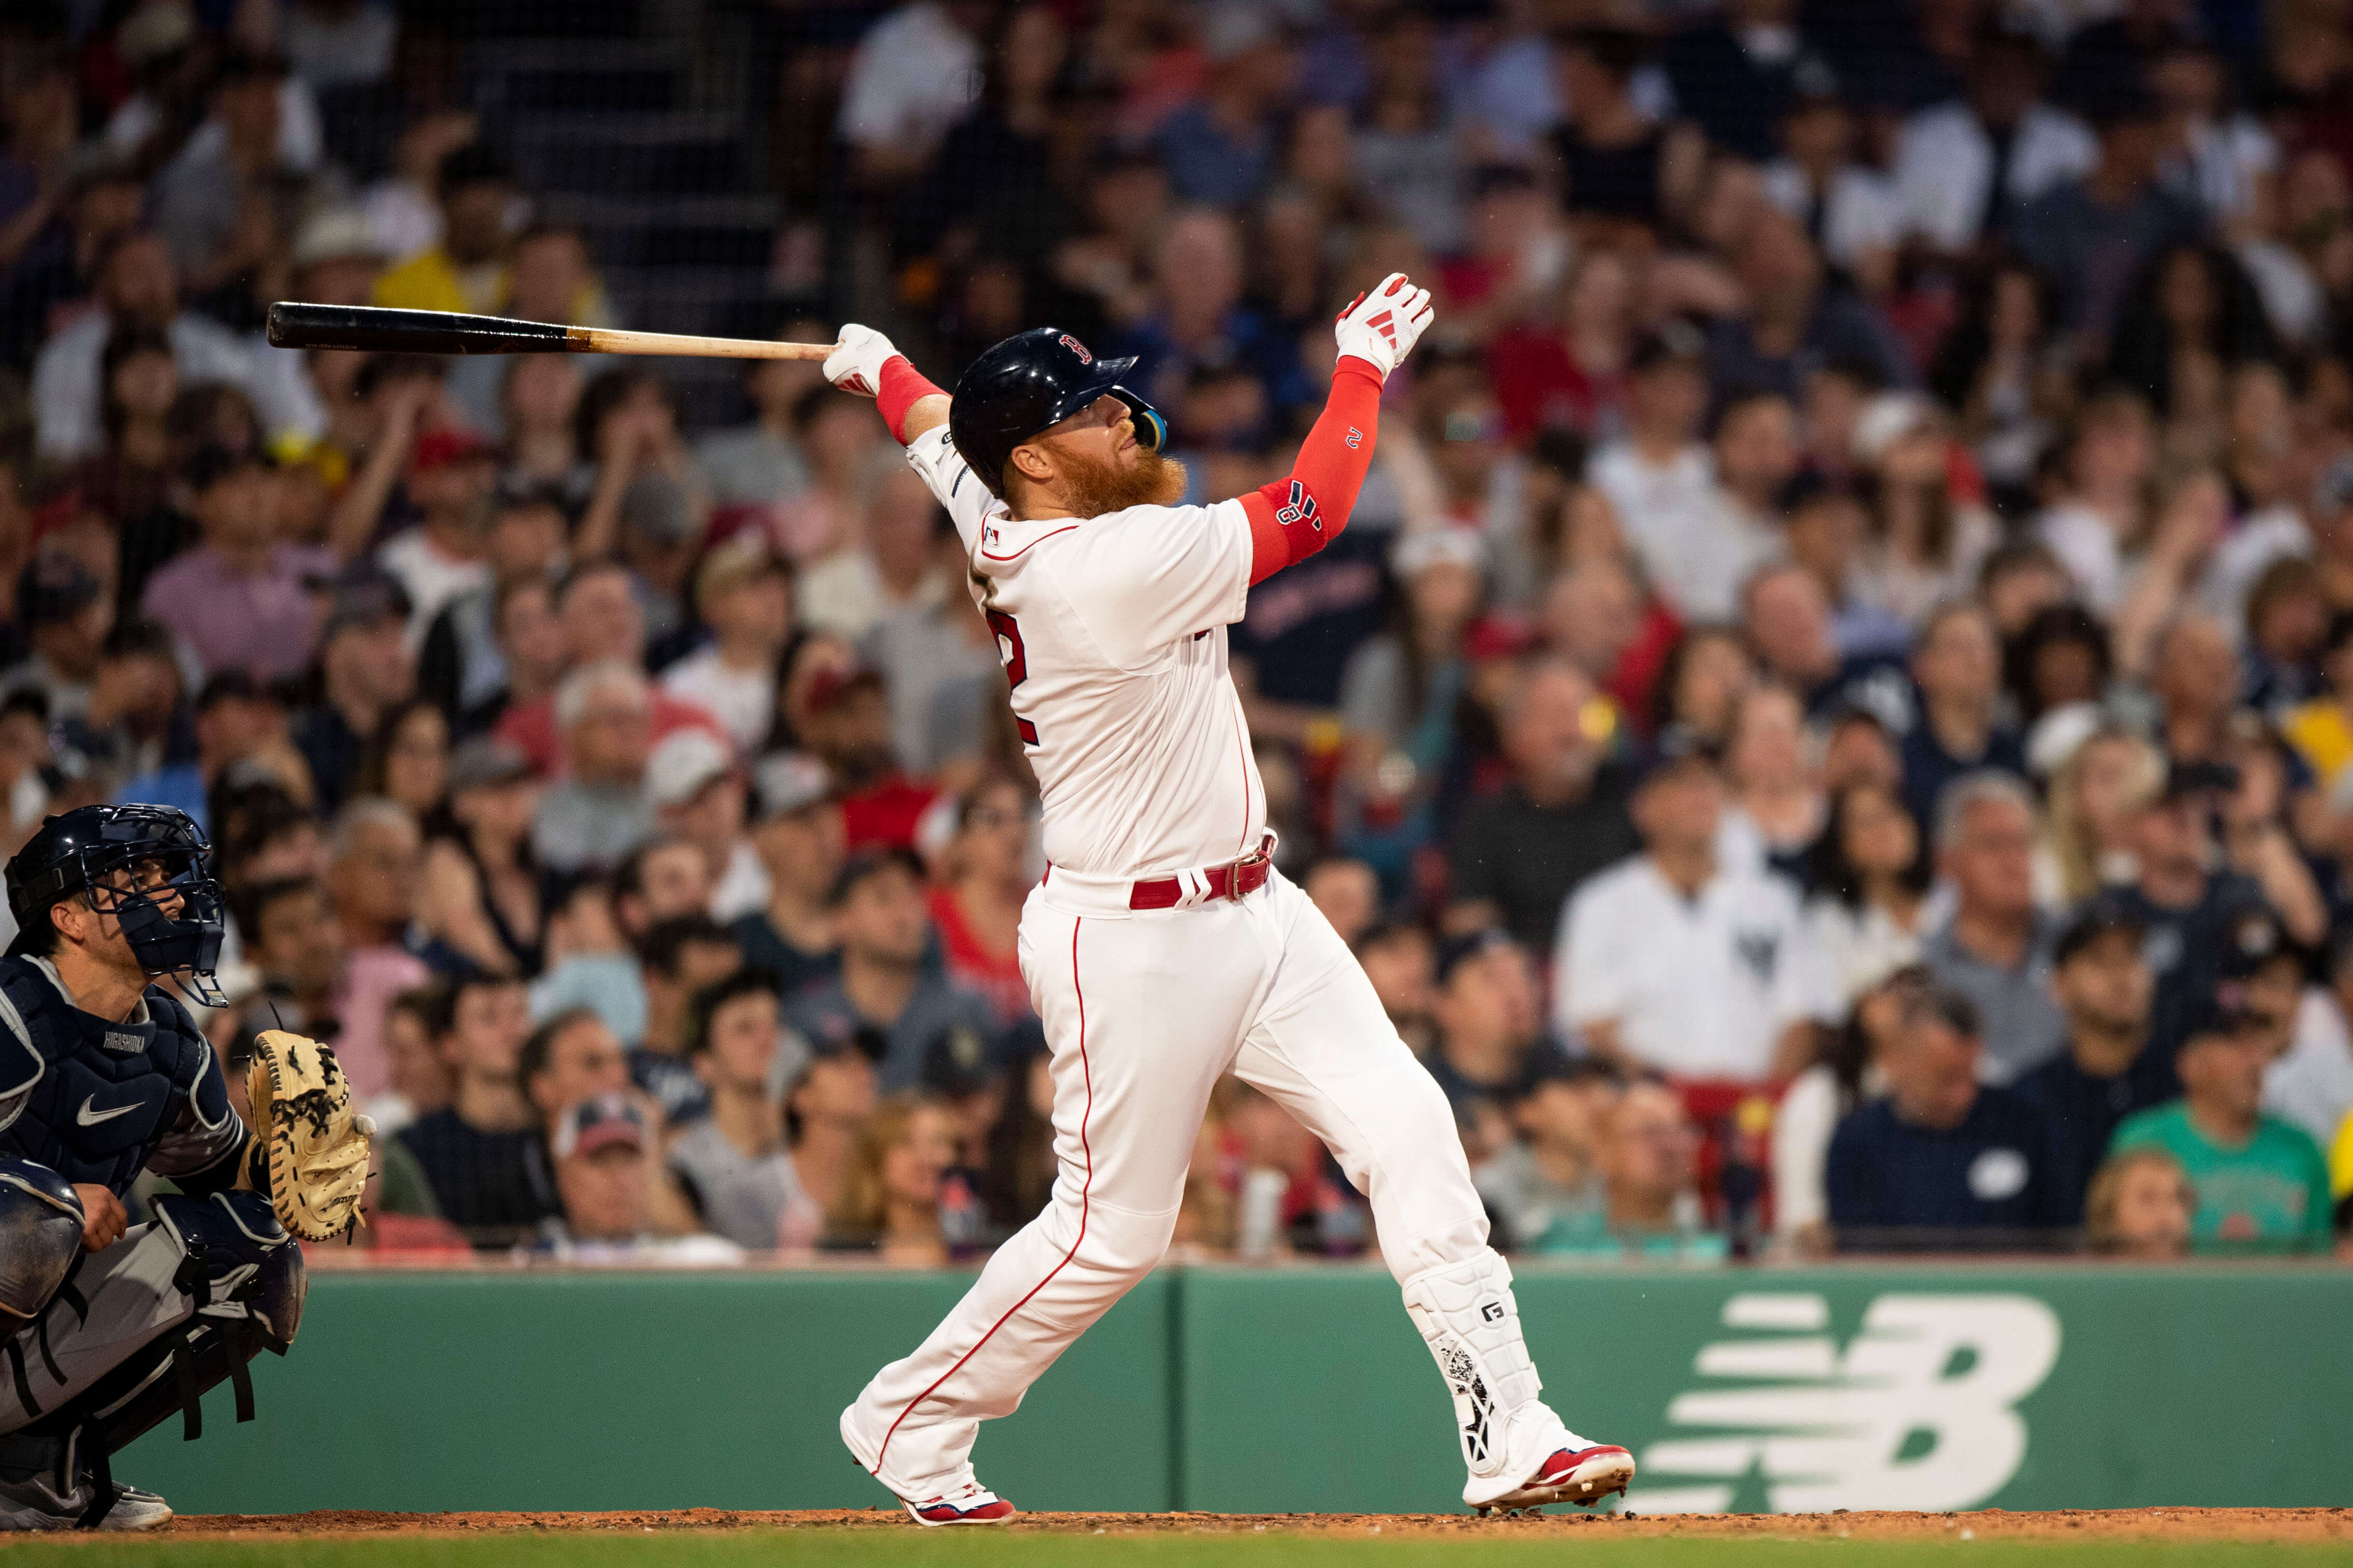 Justin Turner of the Boston Red Sox hits a grand slam.